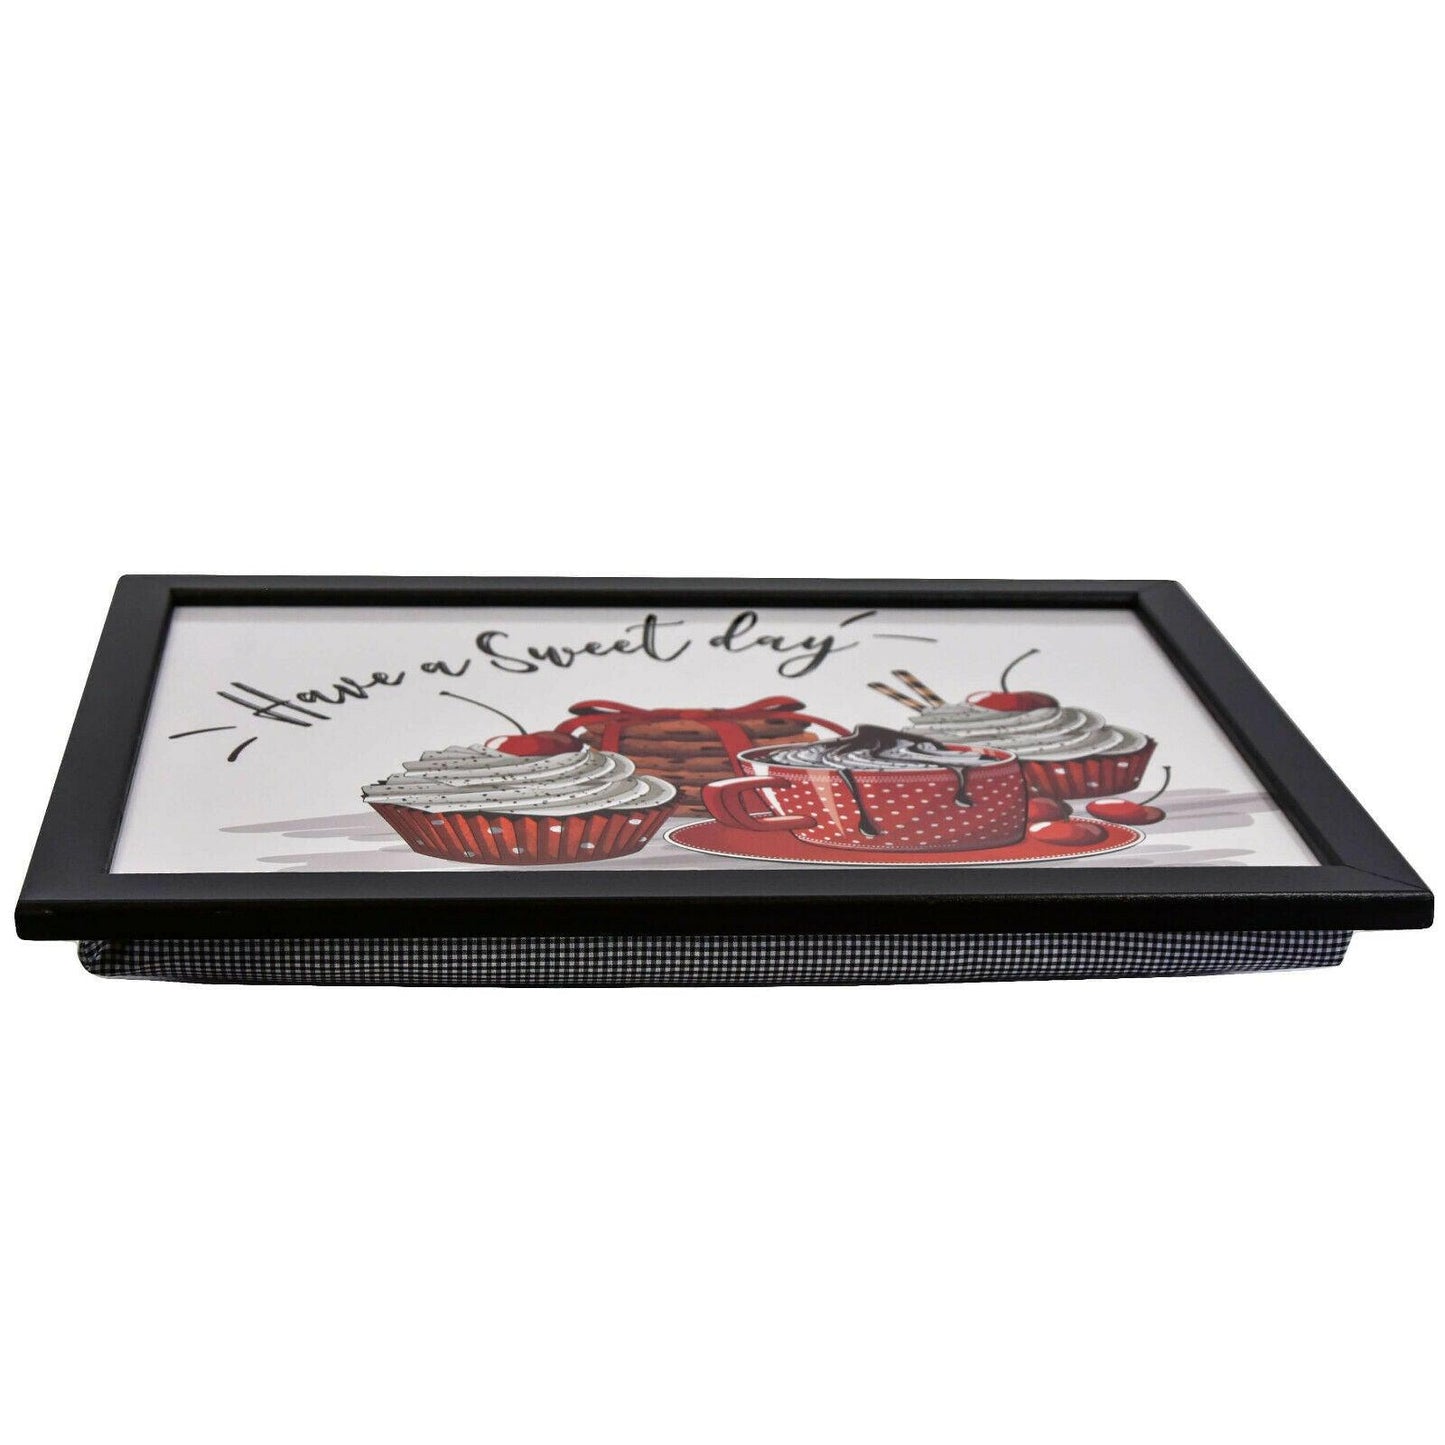 Large Wooden Soft Padded Cushioned Lap Dinner Food Tray - 10 Designs